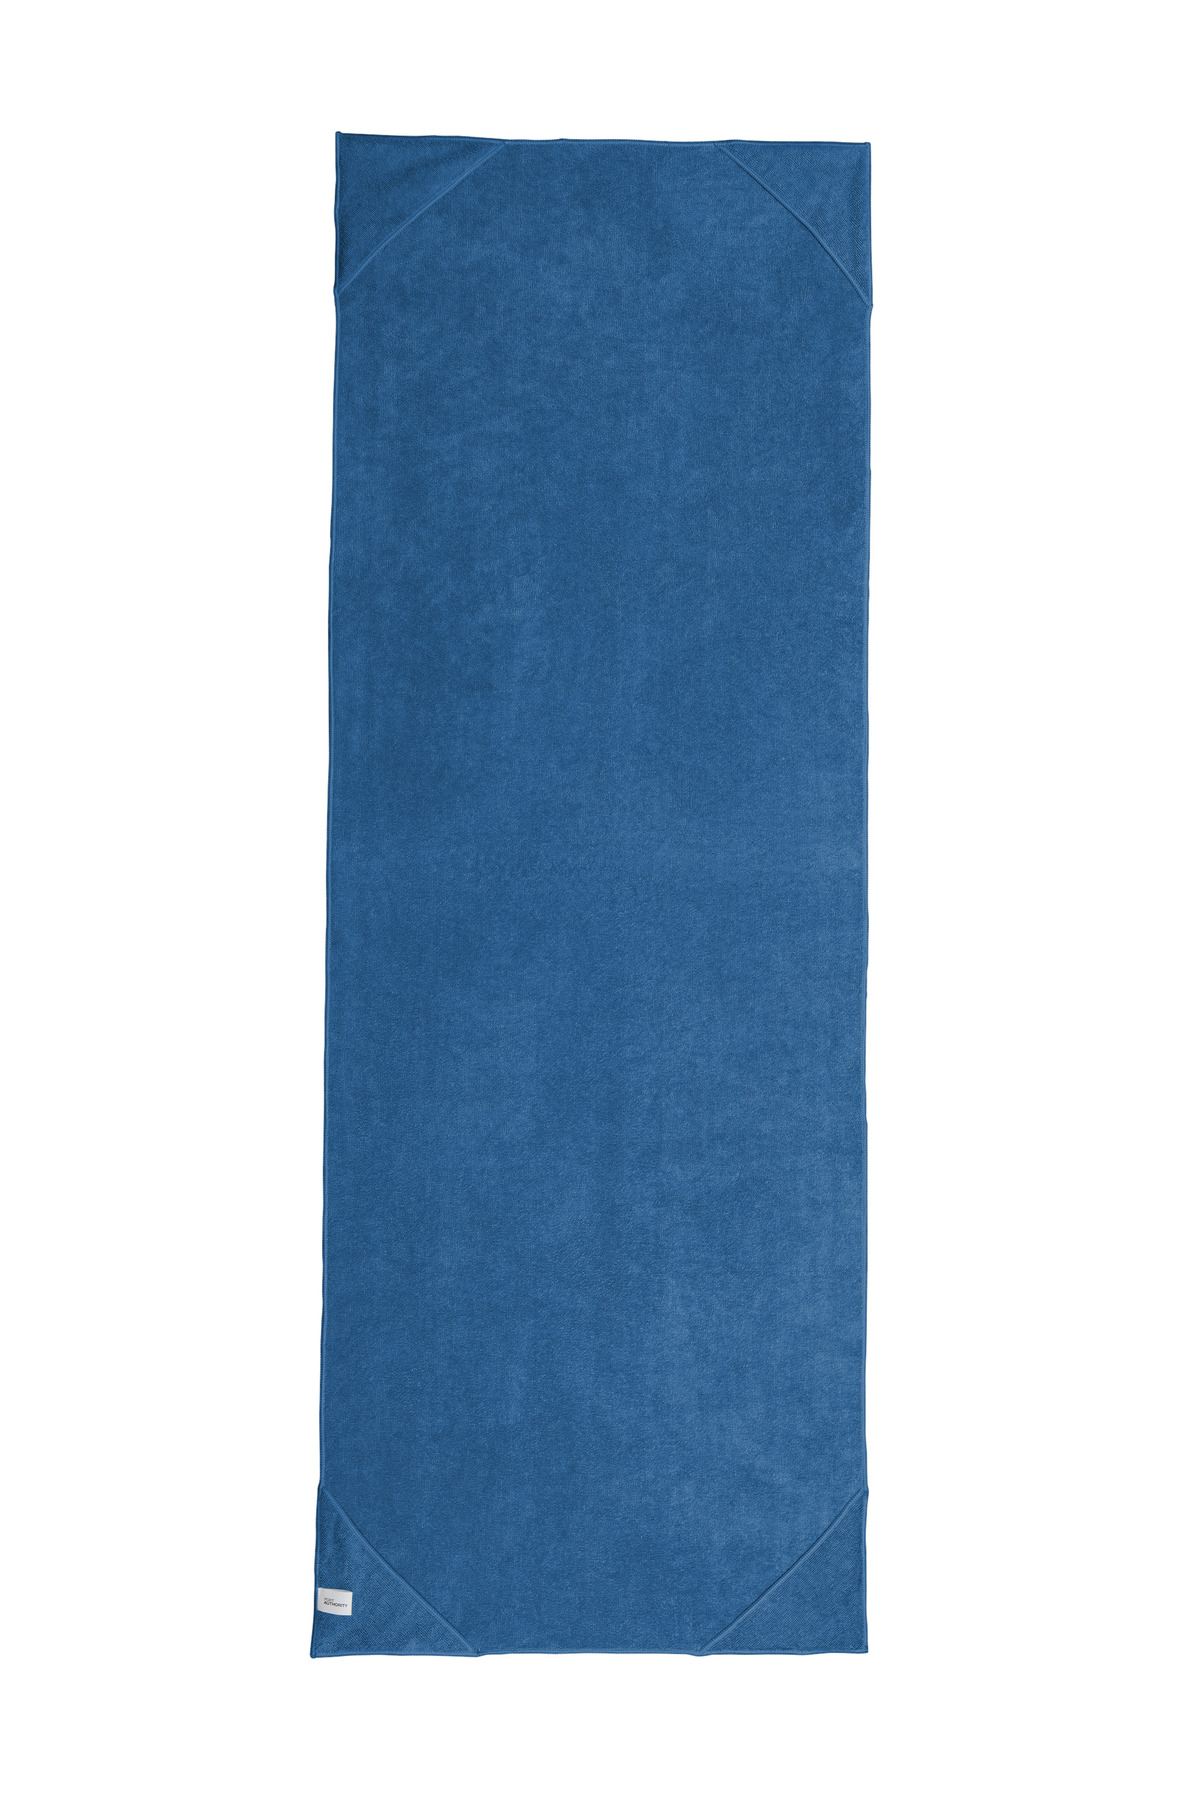 Port Authority Microfiber Stay Fitness Mat Towel-